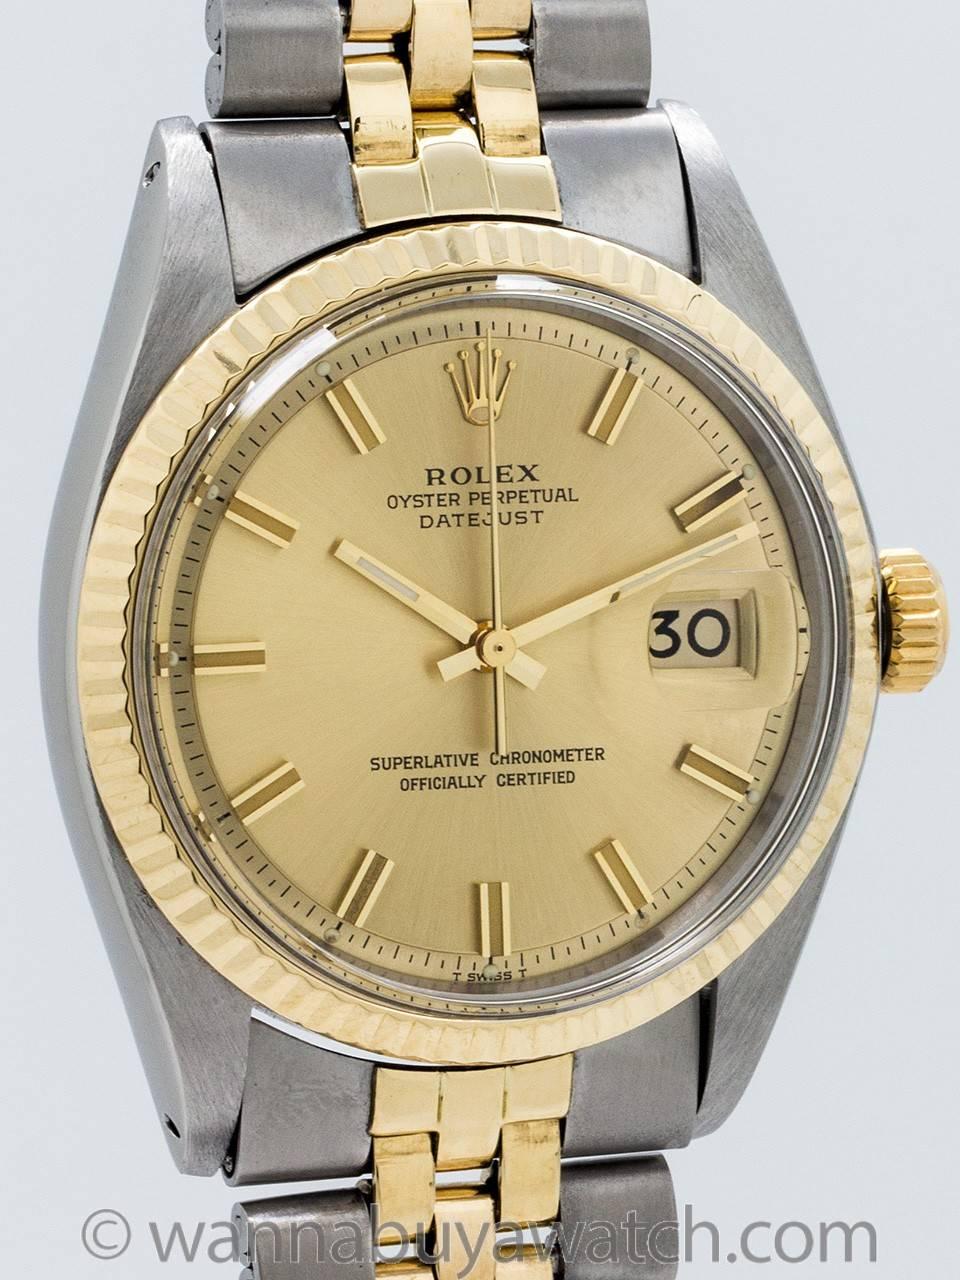 Rolex Datejust ref 1603 stainless steel and 14K yellow gold circa 1970’s. Featuring a 36mm diameter case with 14K YG fluted bezel, acrylic crystal, and original champagne, pie pan dial with applied gold indexes and gold baton hands. Powered by self